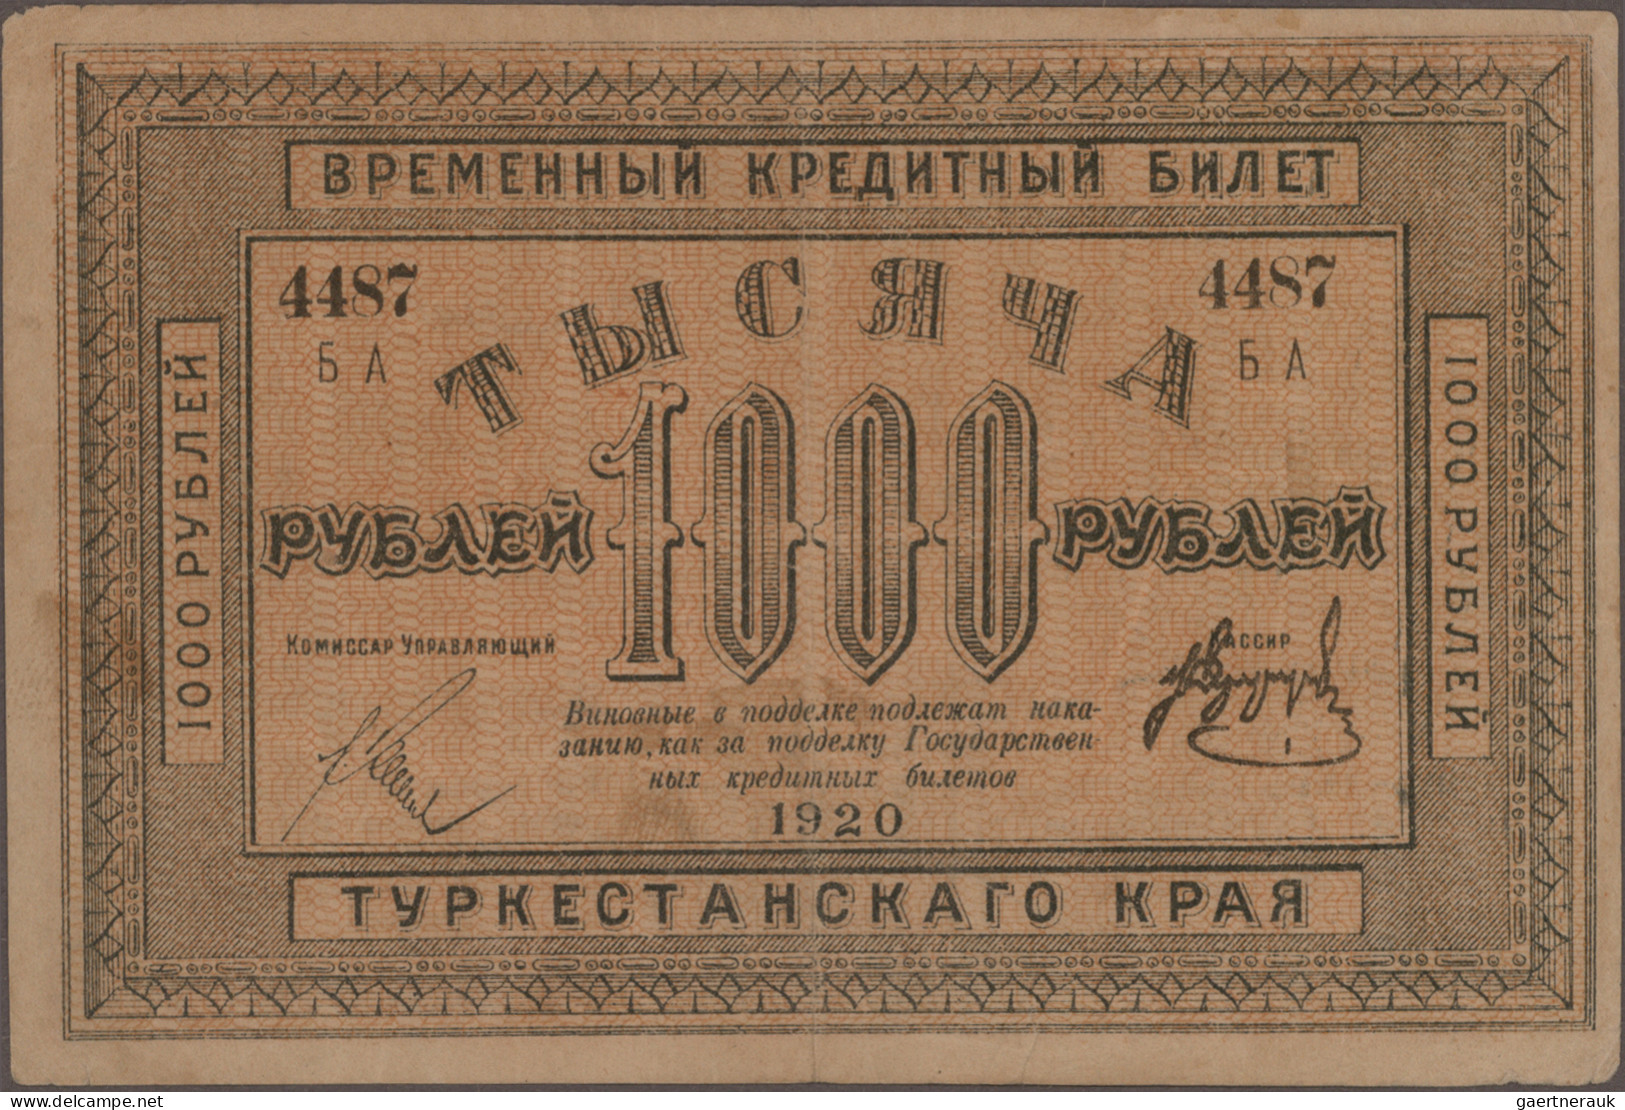 Russia - Bank Notes: Central Asia, lot with 21 banknotes, series 1918-1923, comp